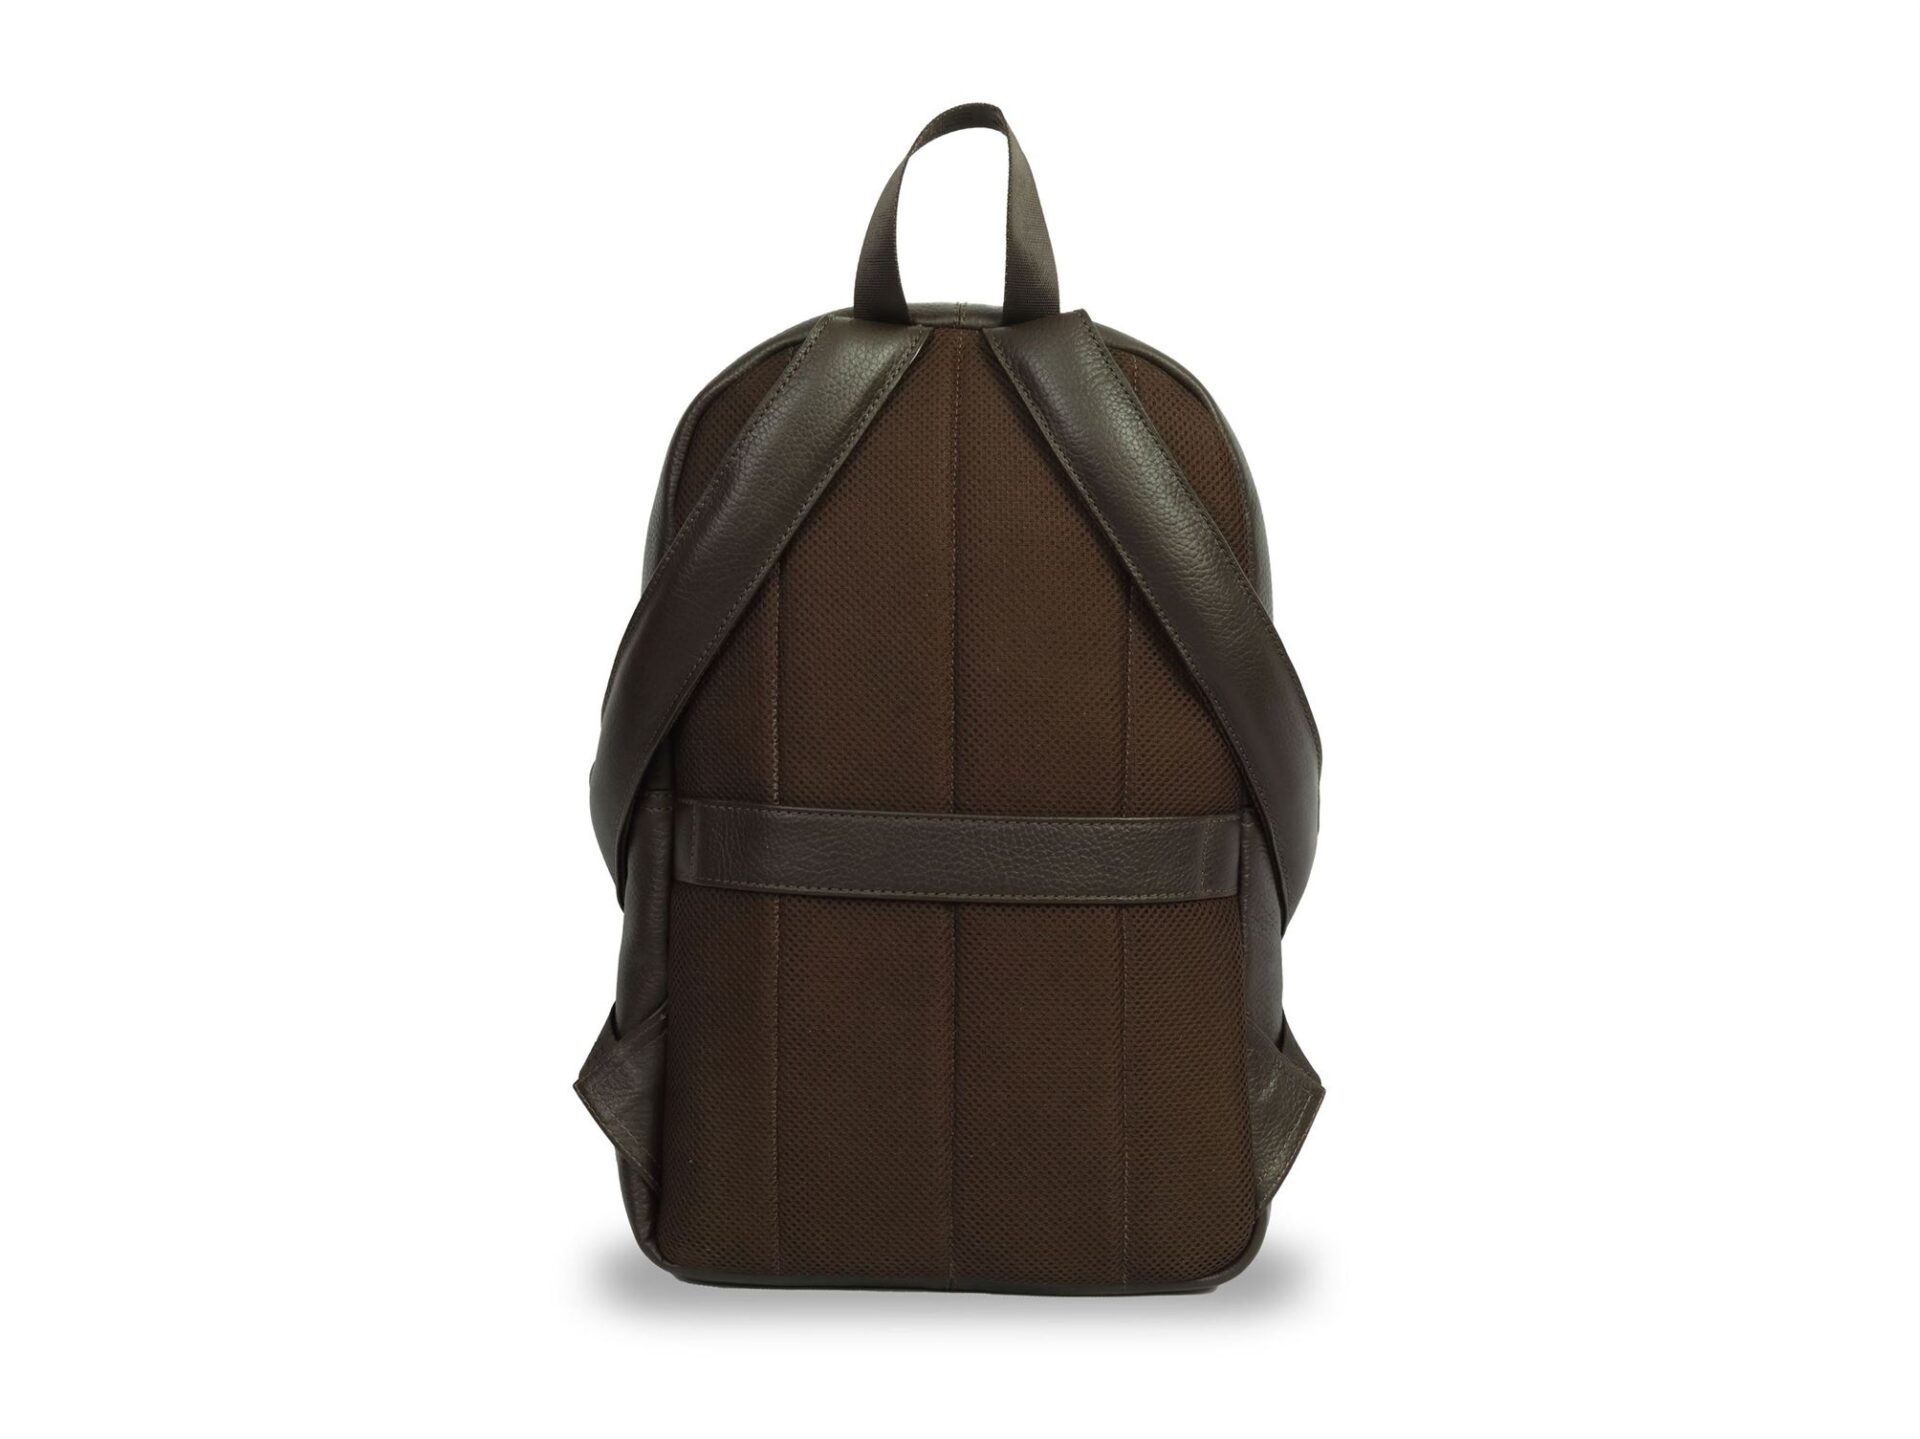 Amazon.com: Leather Backpack Purse Mid Size & Convertible into single strap  sling Bag or Backpack wearing Multiple Organizer Pockets Dark Brown:  Clothing, Shoes & Jewelry